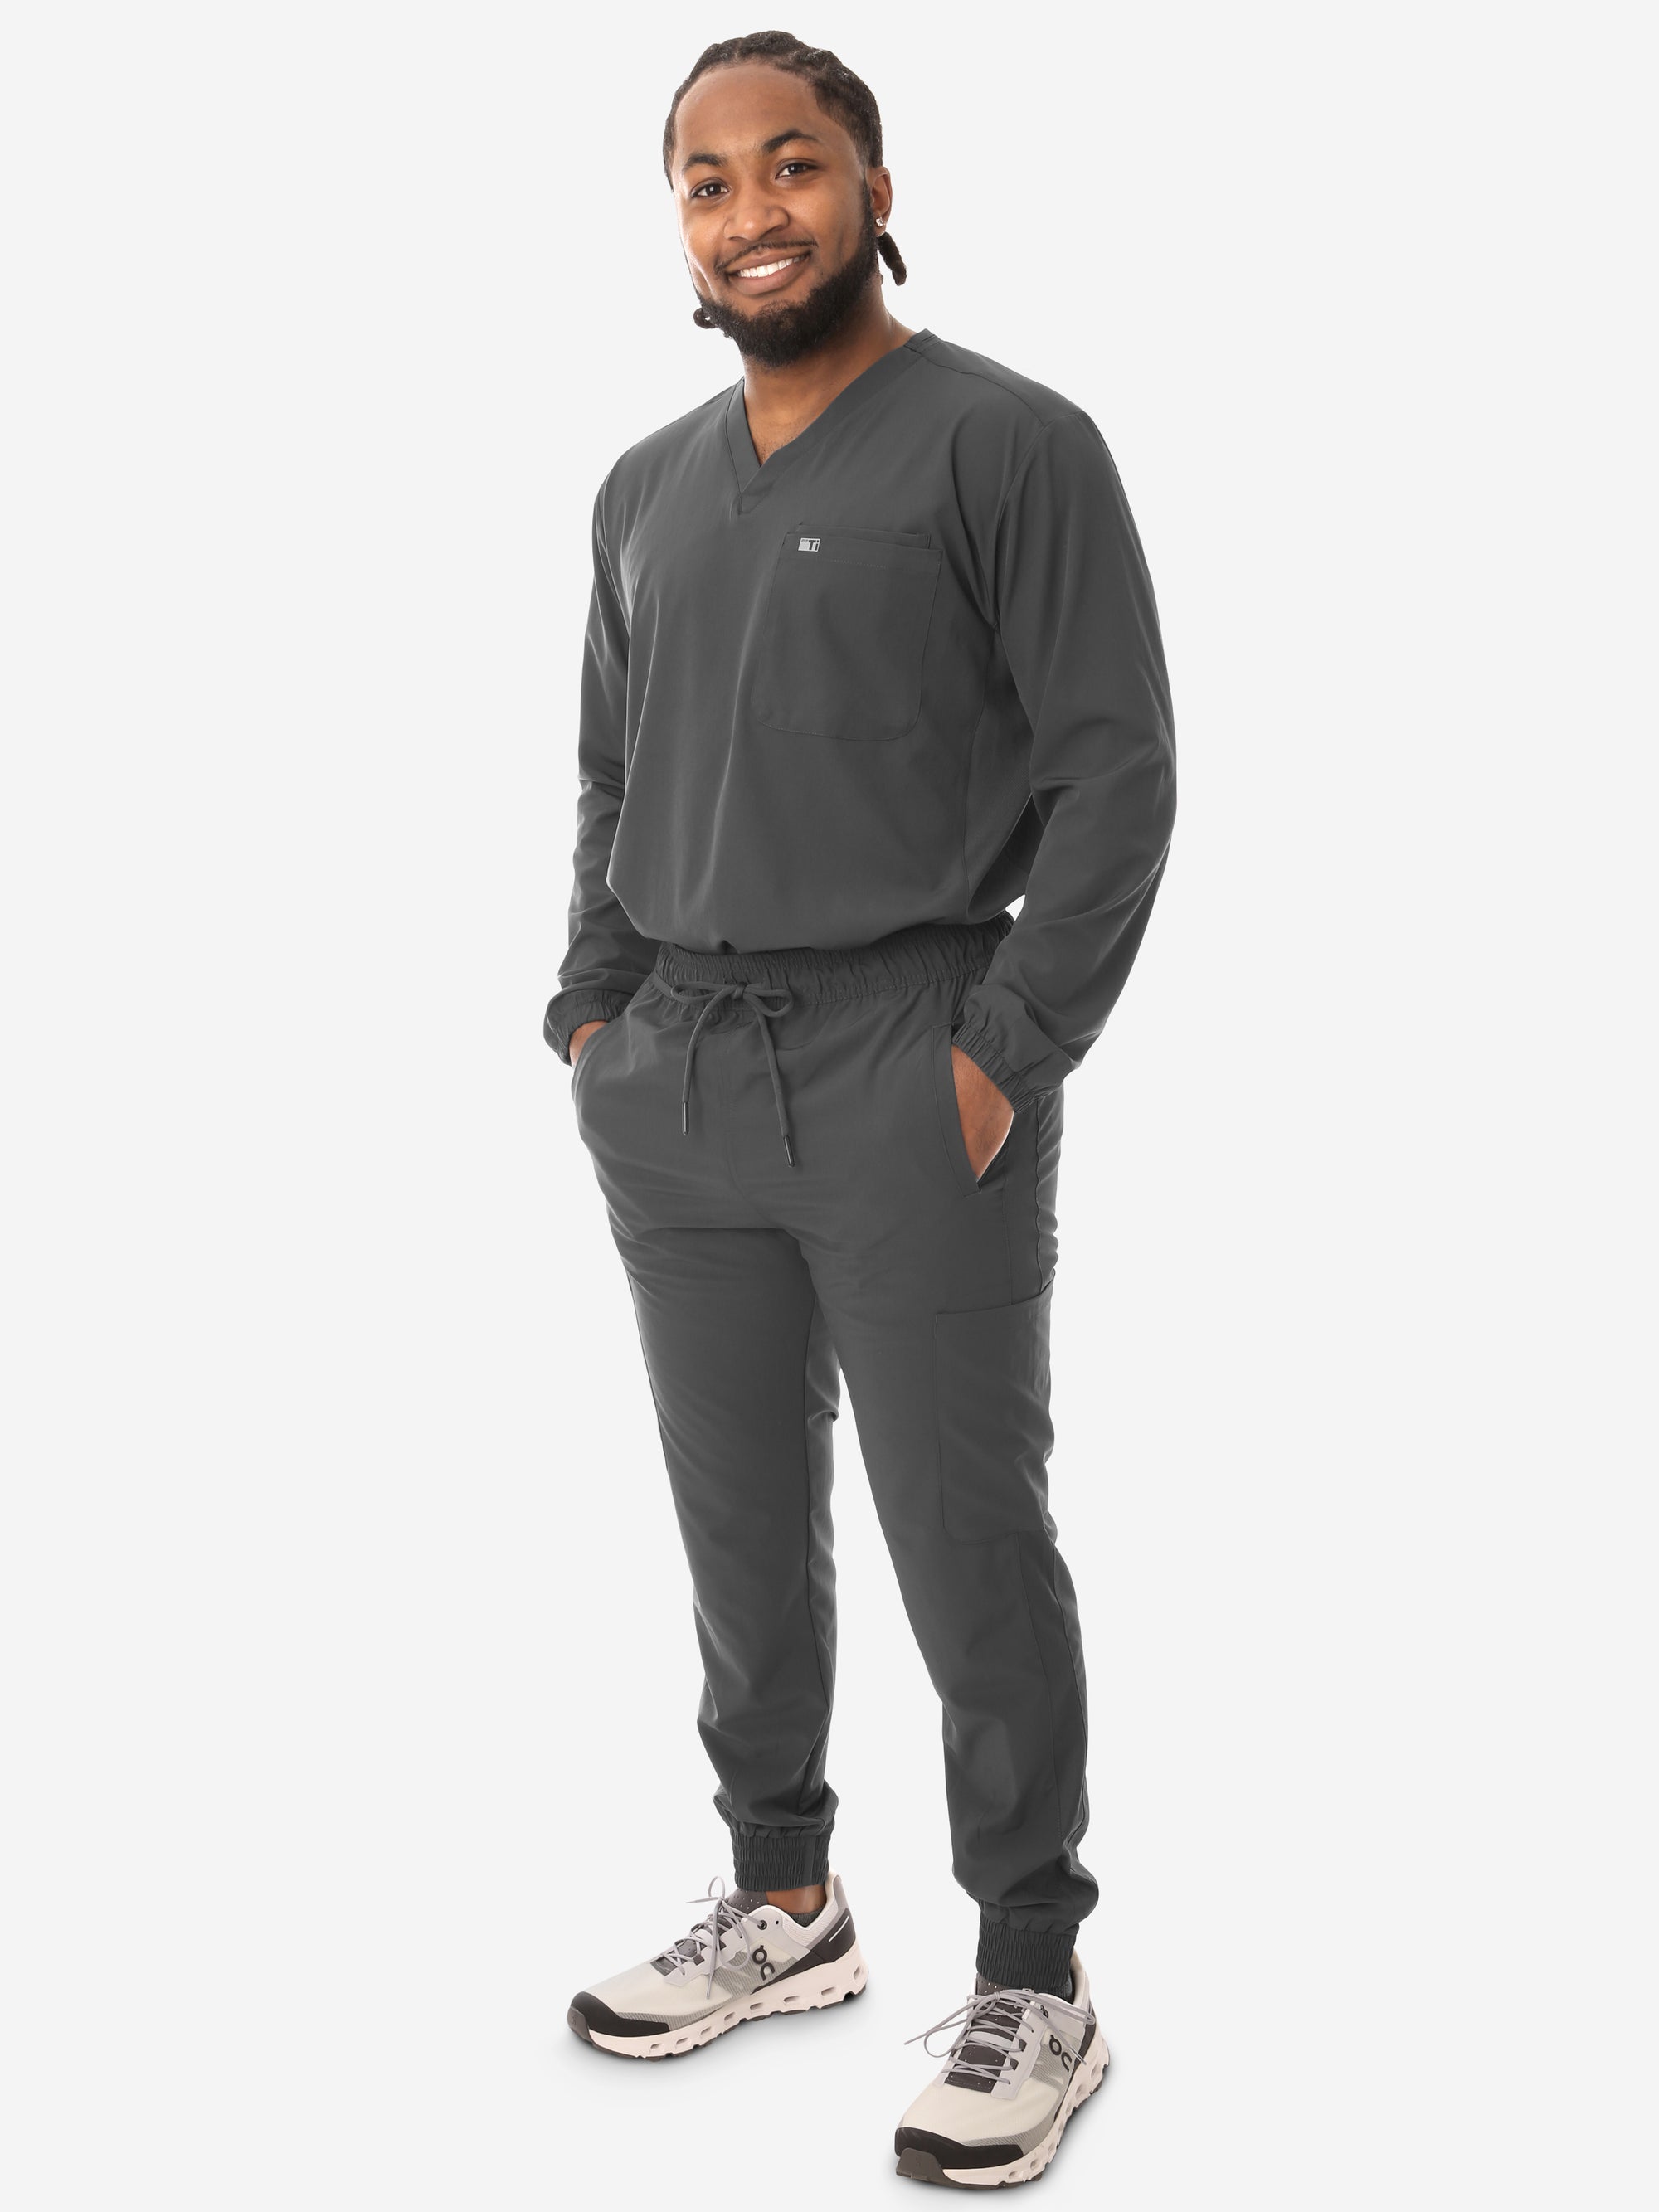 Men&#39;s Long Sleeve Scrub Top with Two Chest Pockets Charcoal Gray Full Body Front View with Jogger Scrub Pants